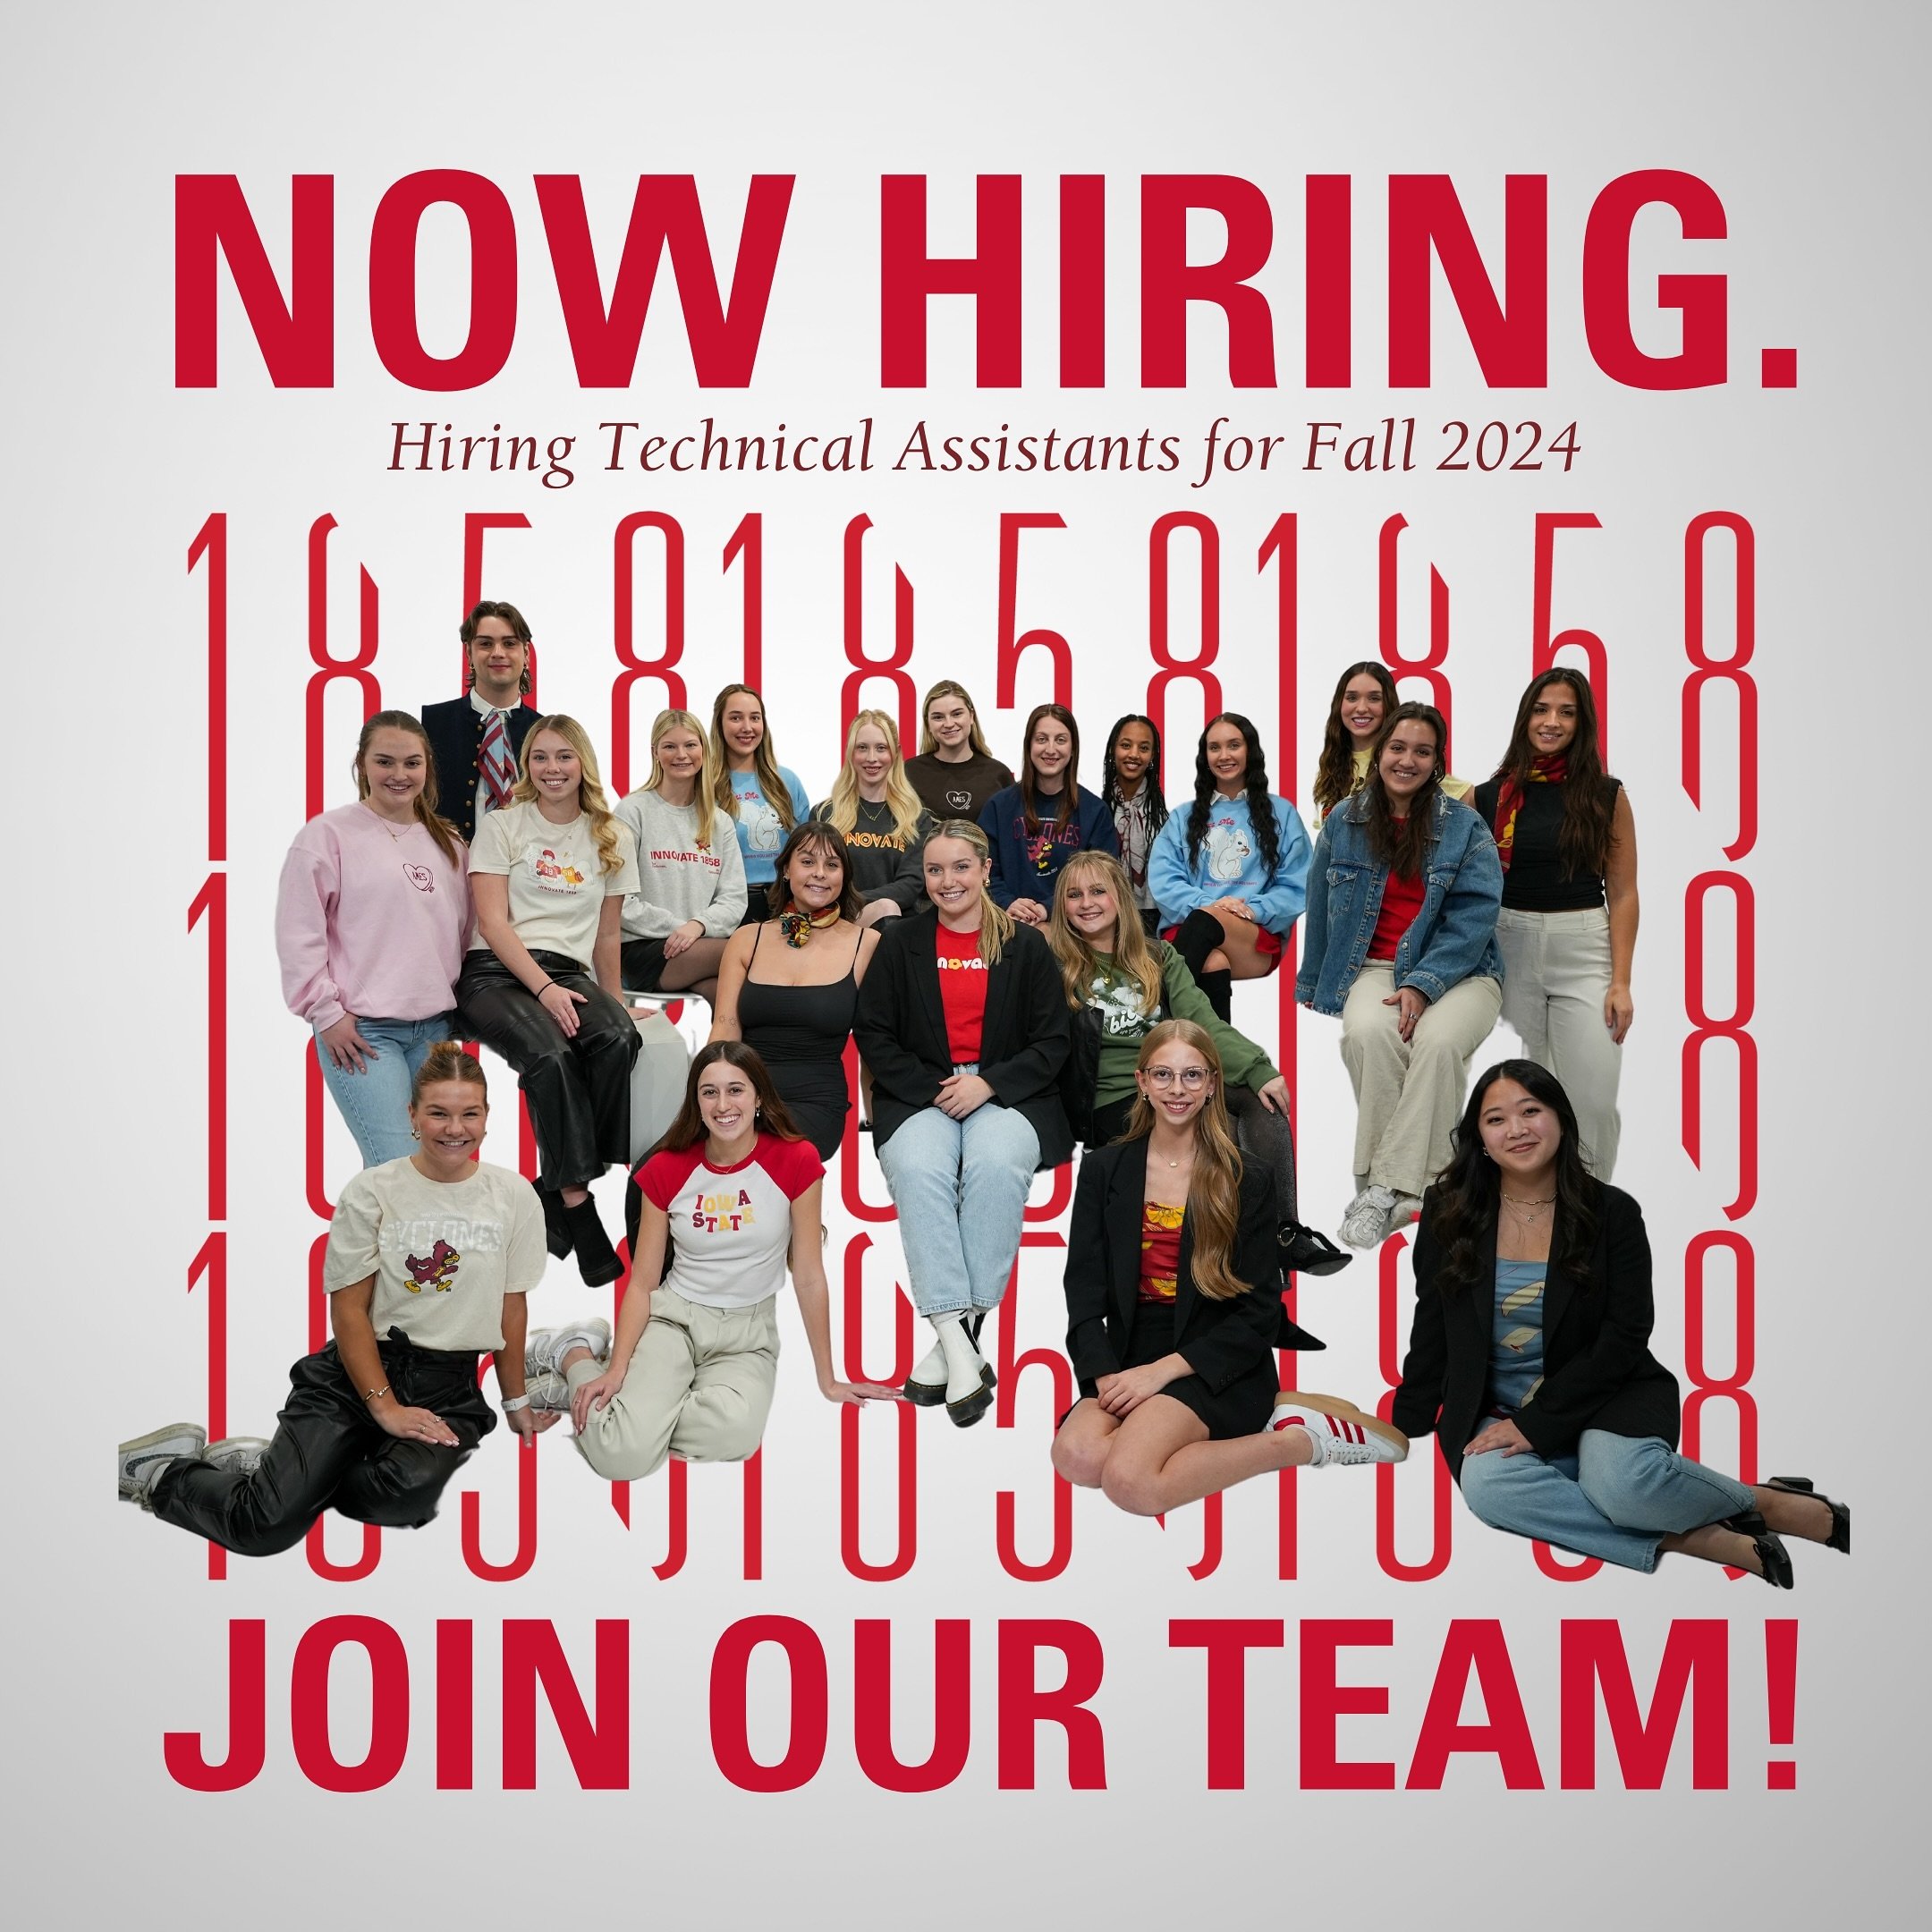 WE ARE HIRING!!💡 Interested in joining the Innovate 1858 team? Applications are open for Fall 2024! We are hiring technical assistants only at this time. 

The benefits of working at Innovate 1858 include a hands-on experience within the retail indu